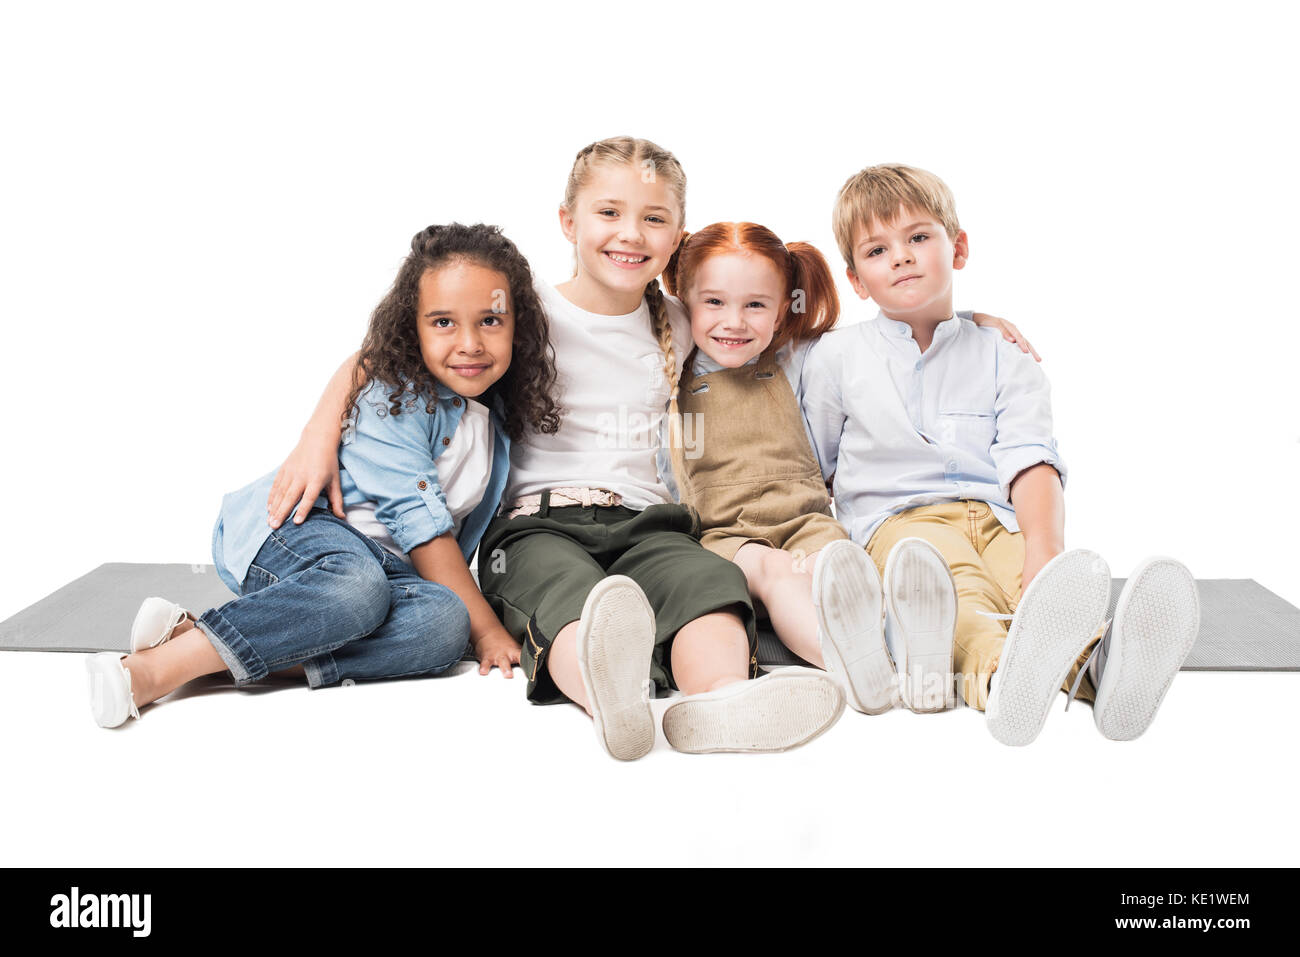 happy multiethnic children sitting together isolated on white Stock Photo